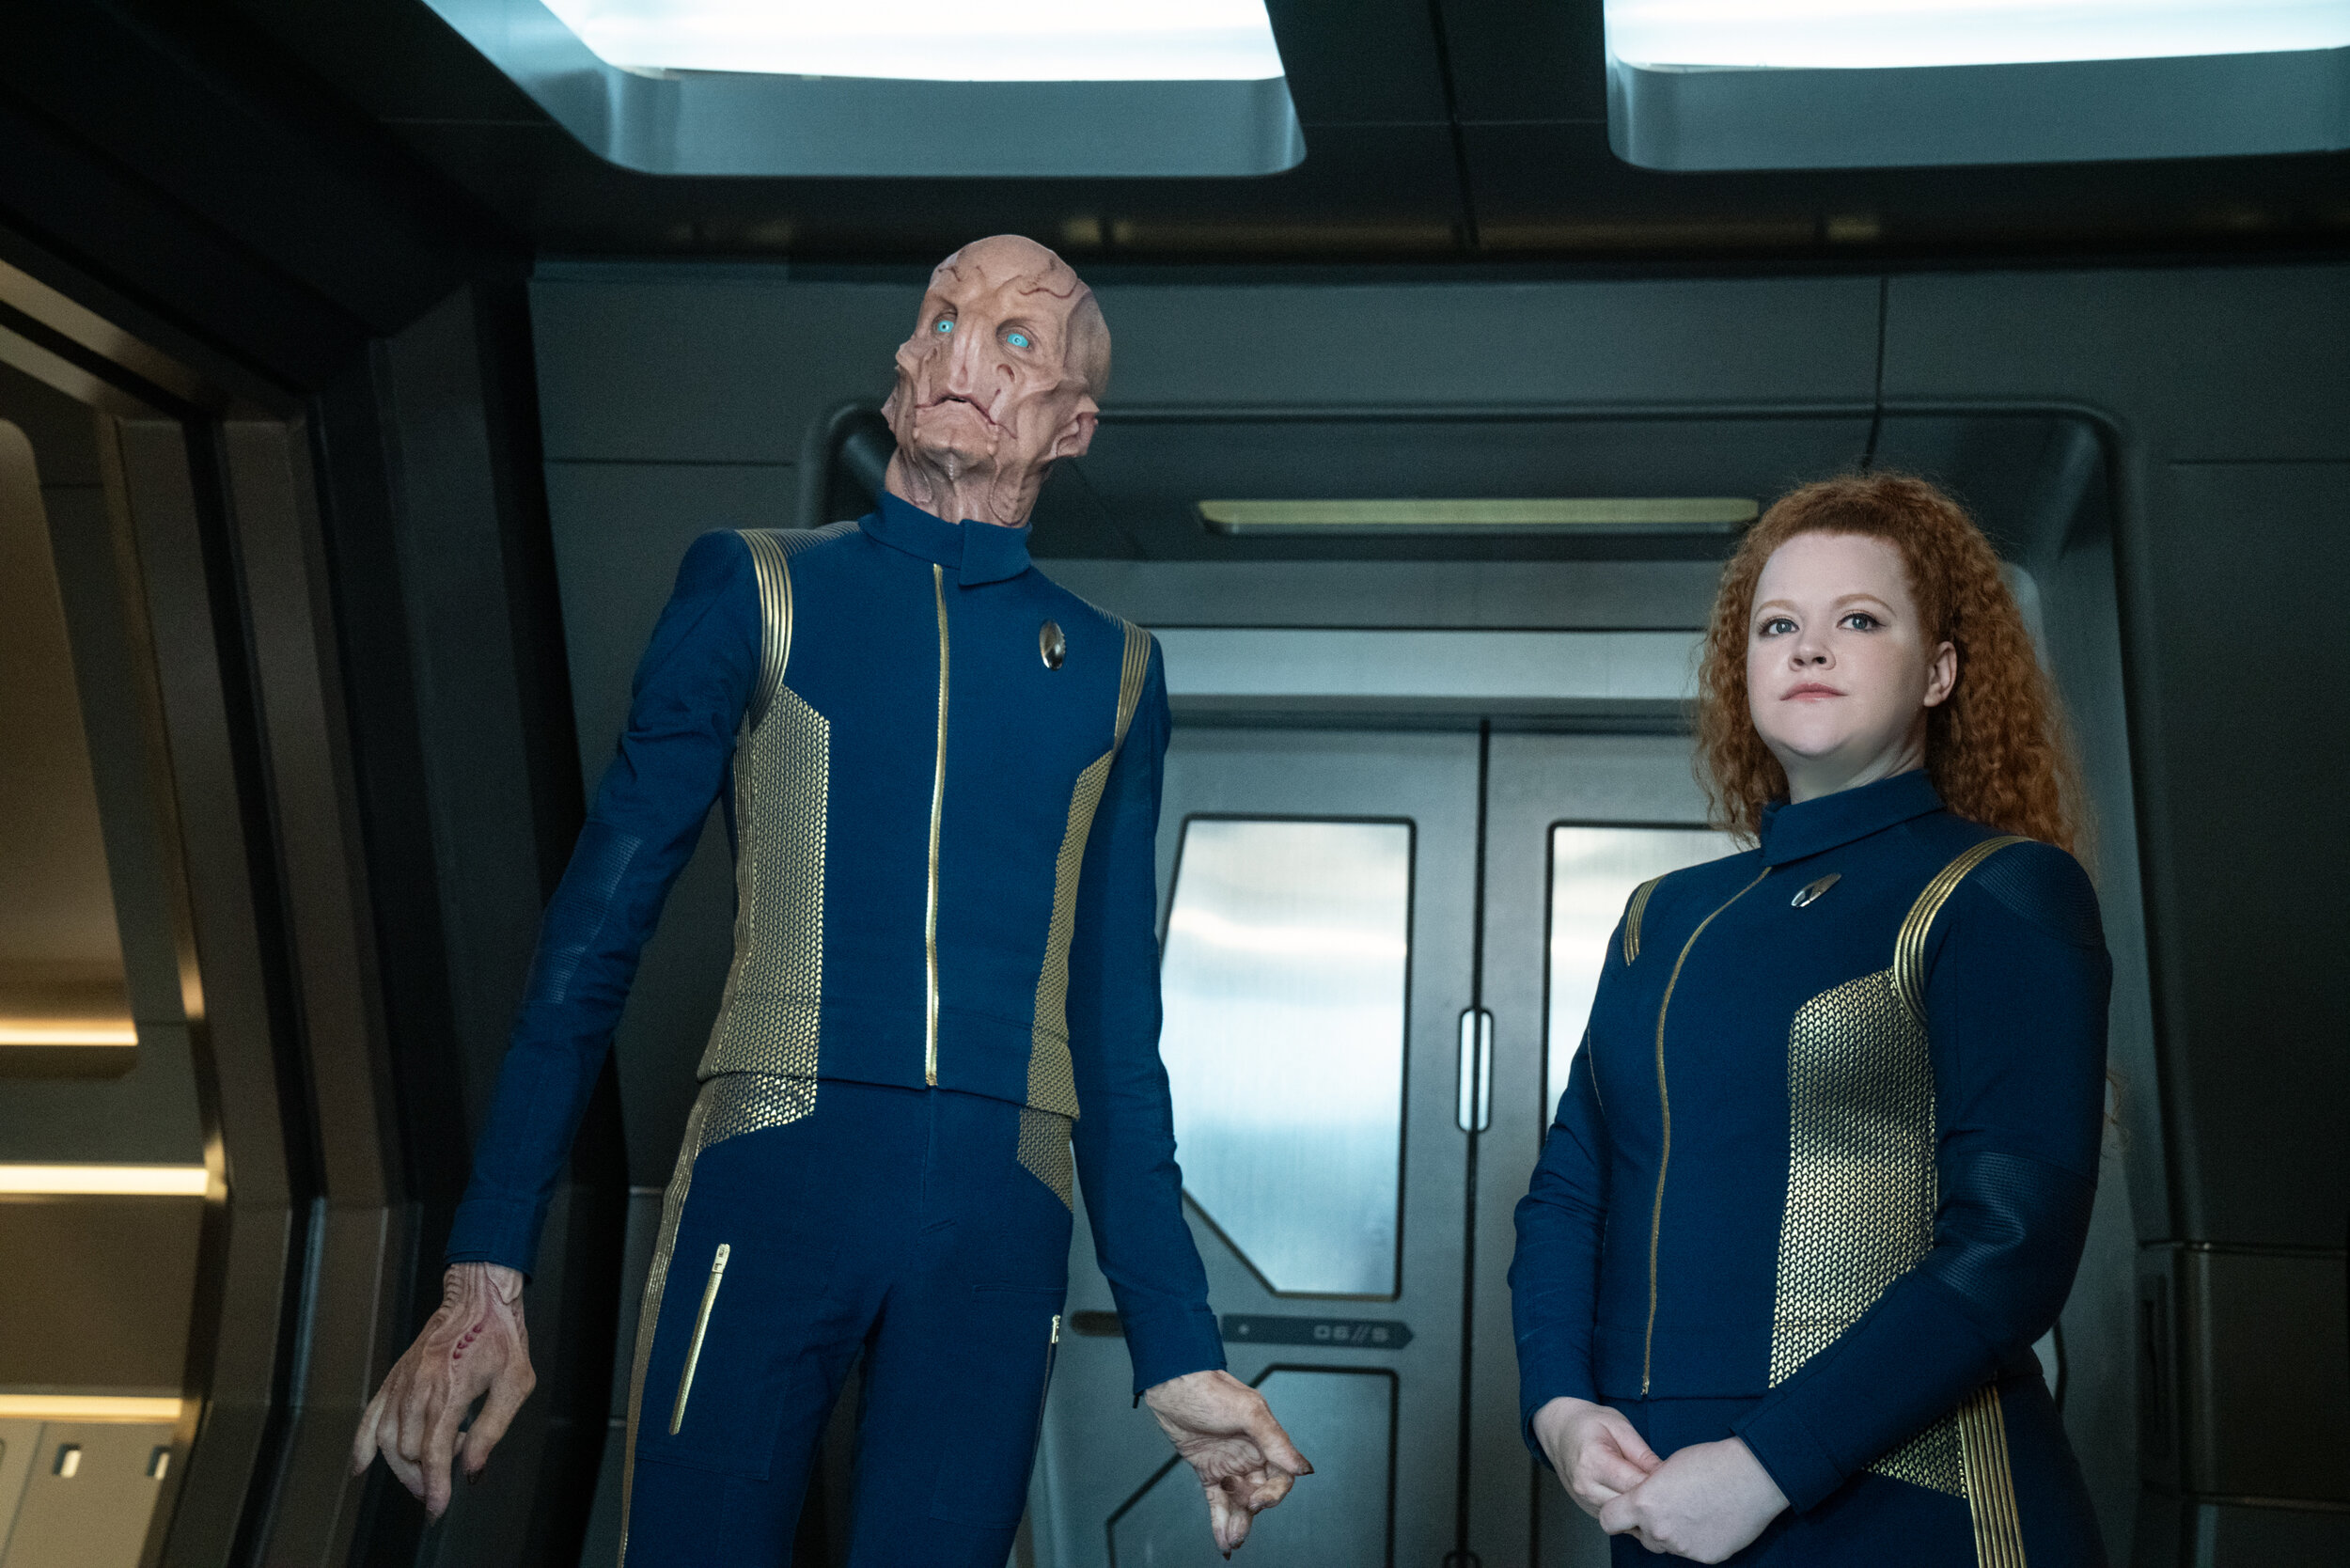   "Terra Firma, Part 1" -- Ep#309 -- Pictured: Doug Jones as Capt. Saru and Mary Wiseman as Ensign Sylvia Tilly of the CBS All Access series STAR TREK: DISCOVERY. Photo Cr: Michael Gibson/CBS ©2020 CBS Interactive, Inc. All Rights Reserved.  